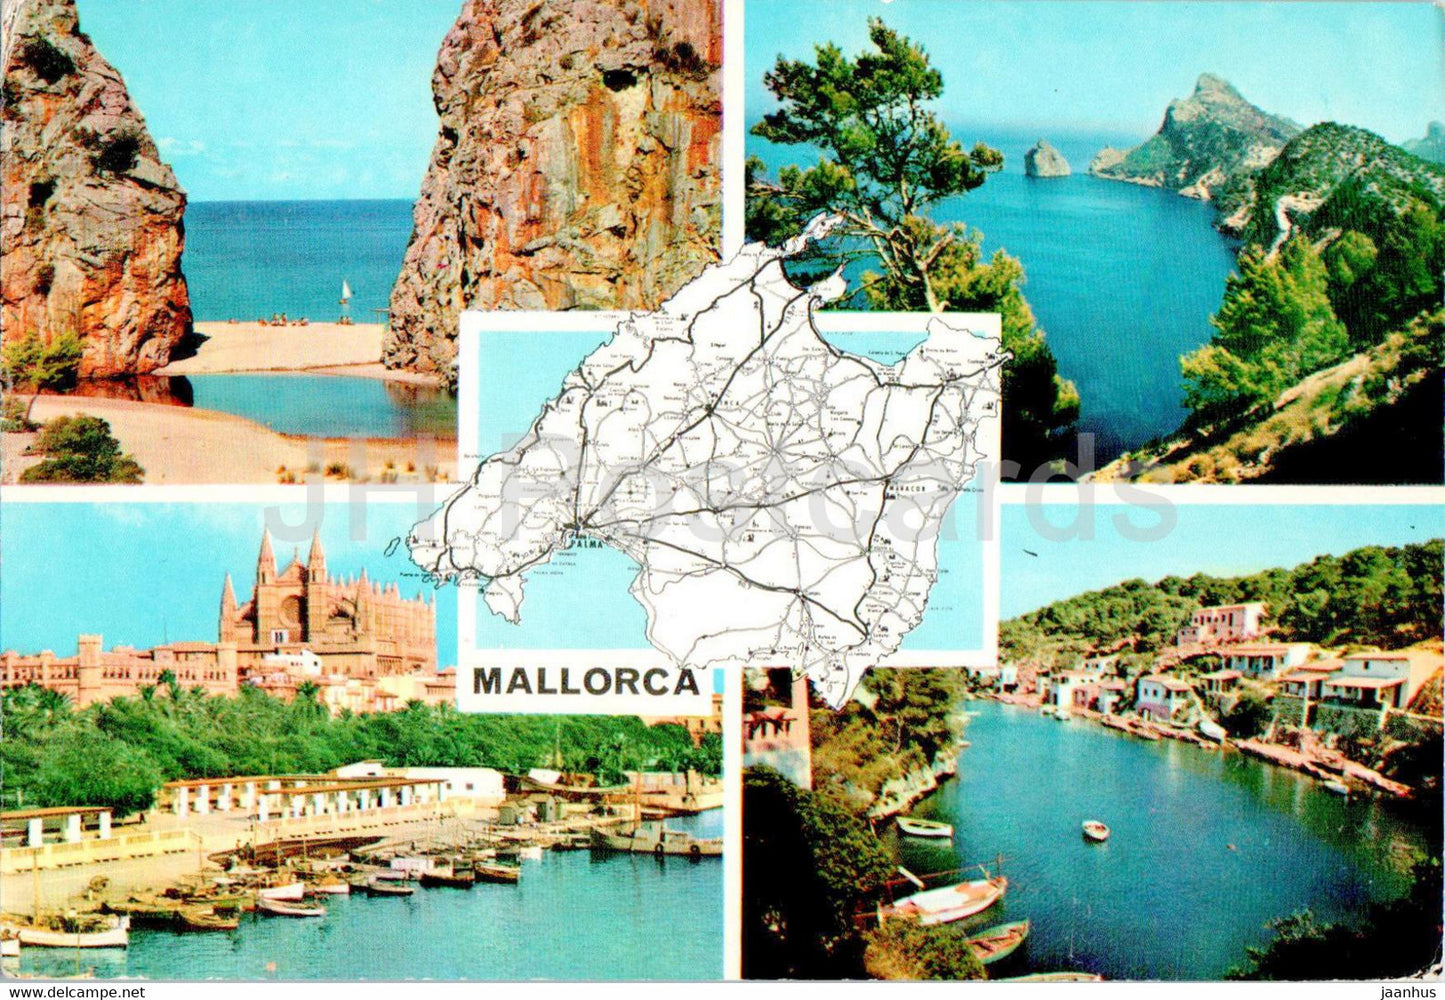 Mallorca - multiview - 50065 - Spain - used - JH Postcards